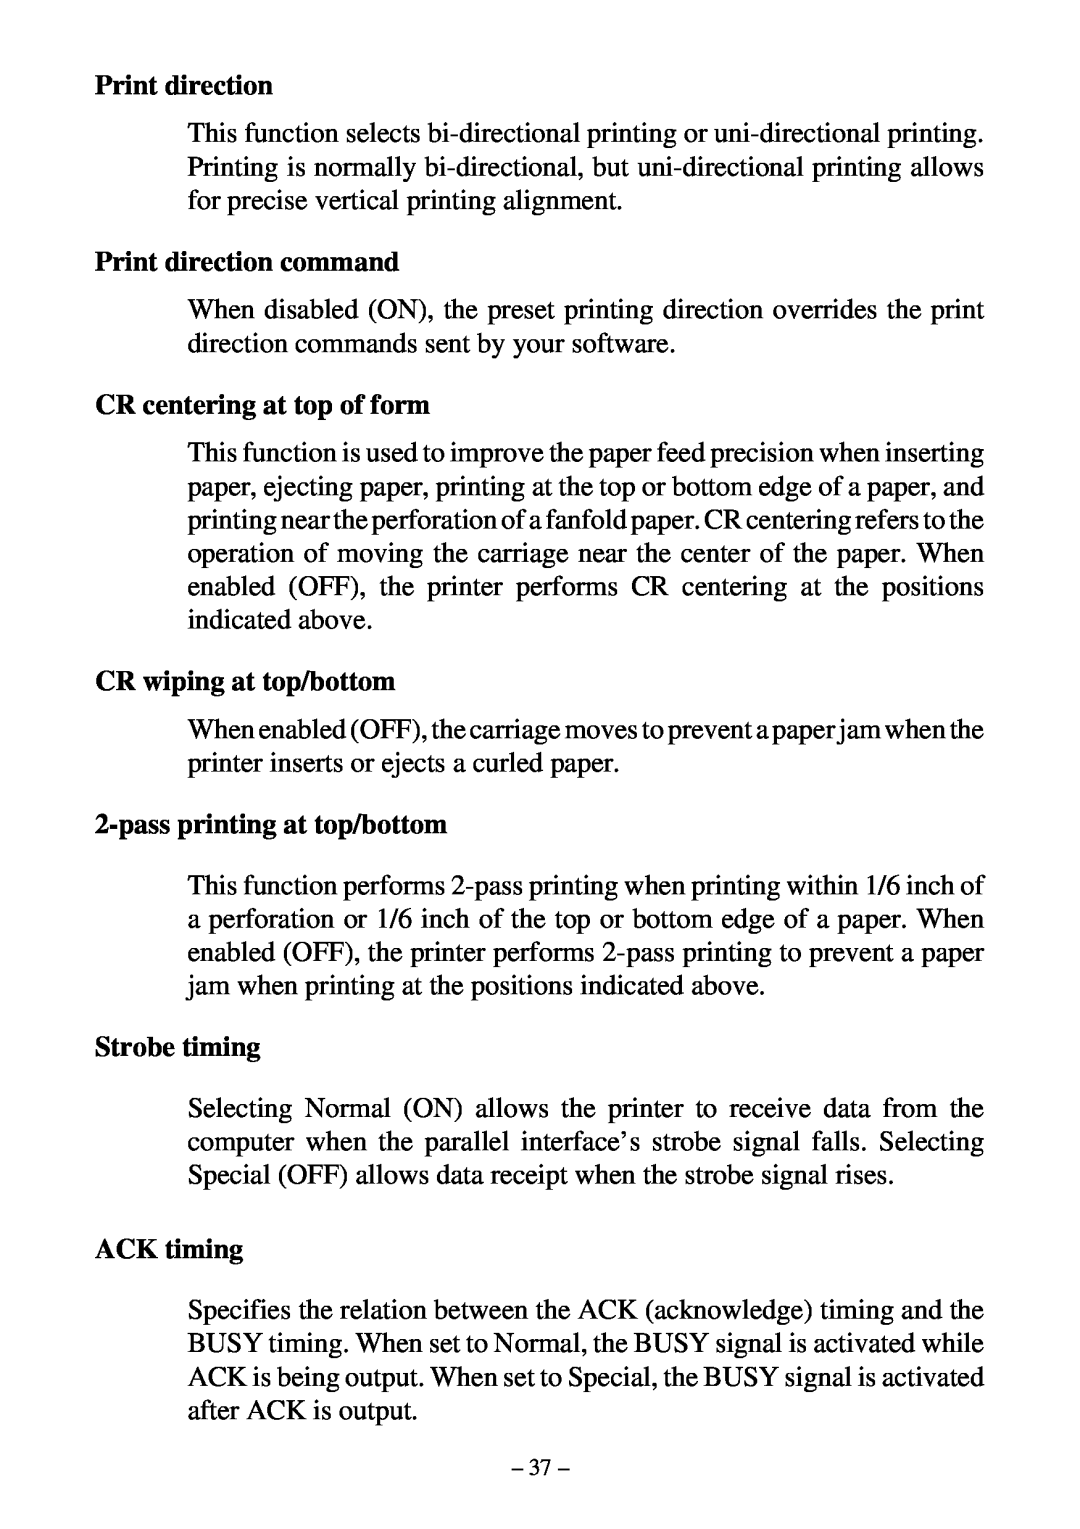 Star Micronics LC-500 Print direction command, CR centering at top of form, CR wiping at top/bottom, Strobe timing 